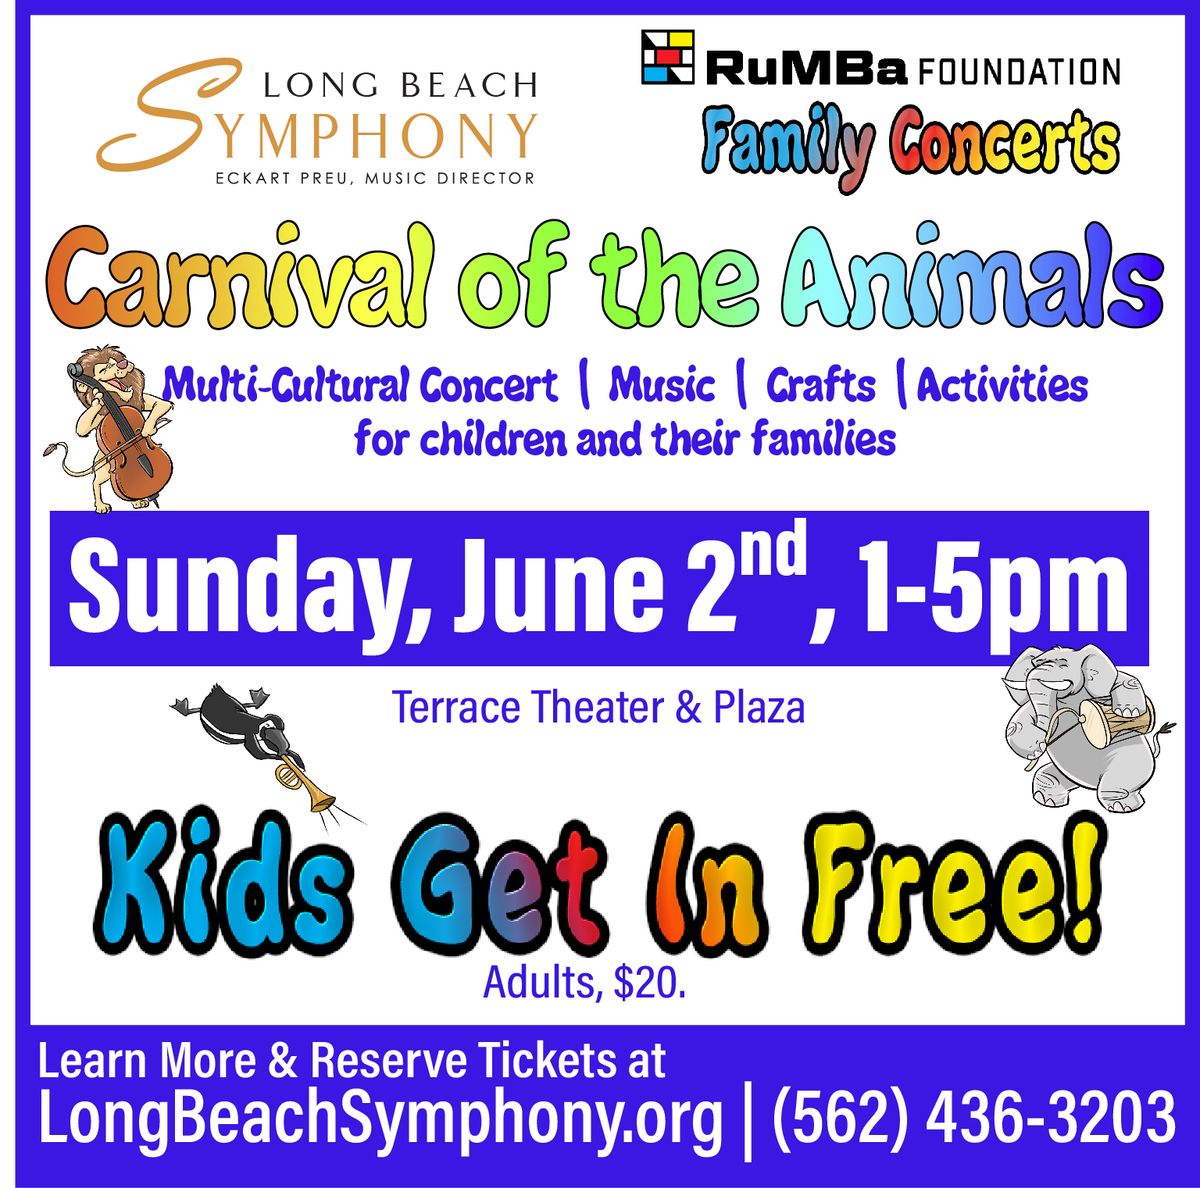 RuMBa Foundation Family Concert. Kids get in Free!